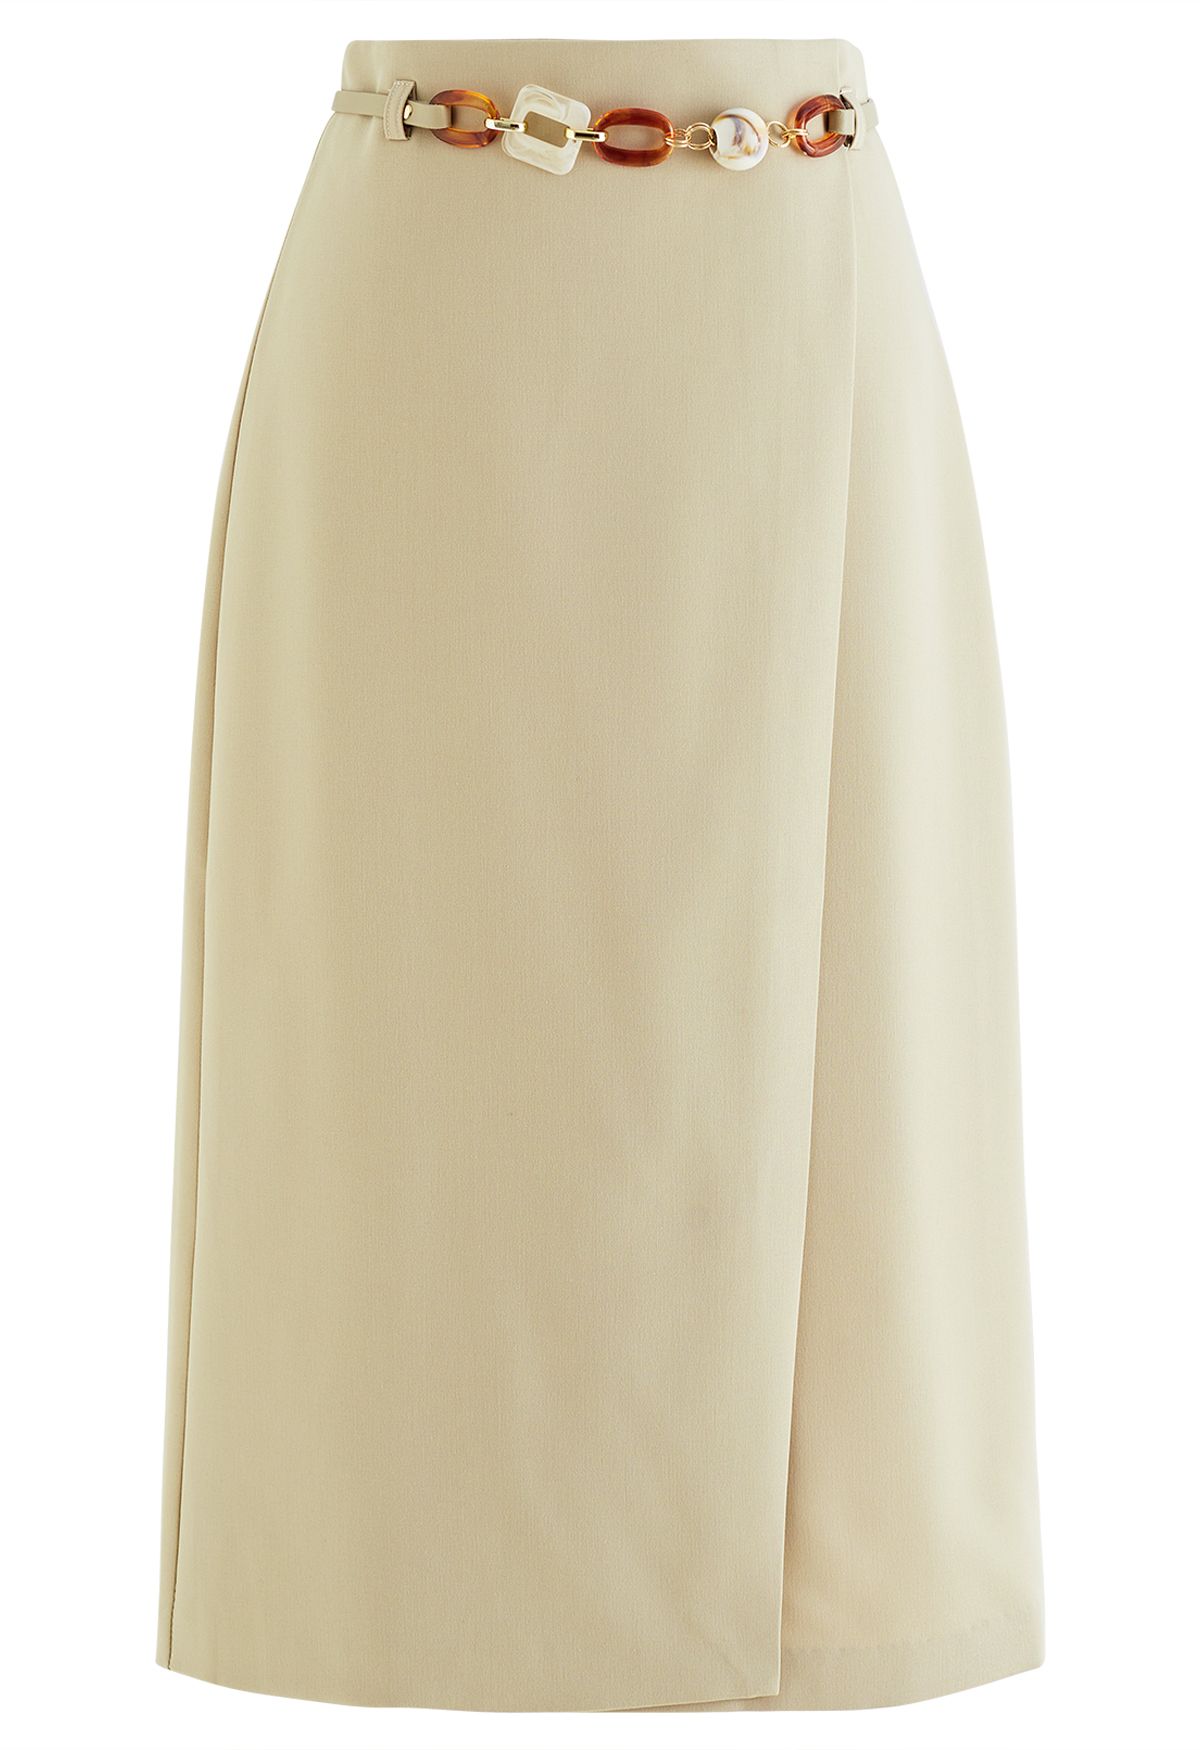 Flap Midi Skirt in Light Yellow - Retro, Indie and Unique Fashion